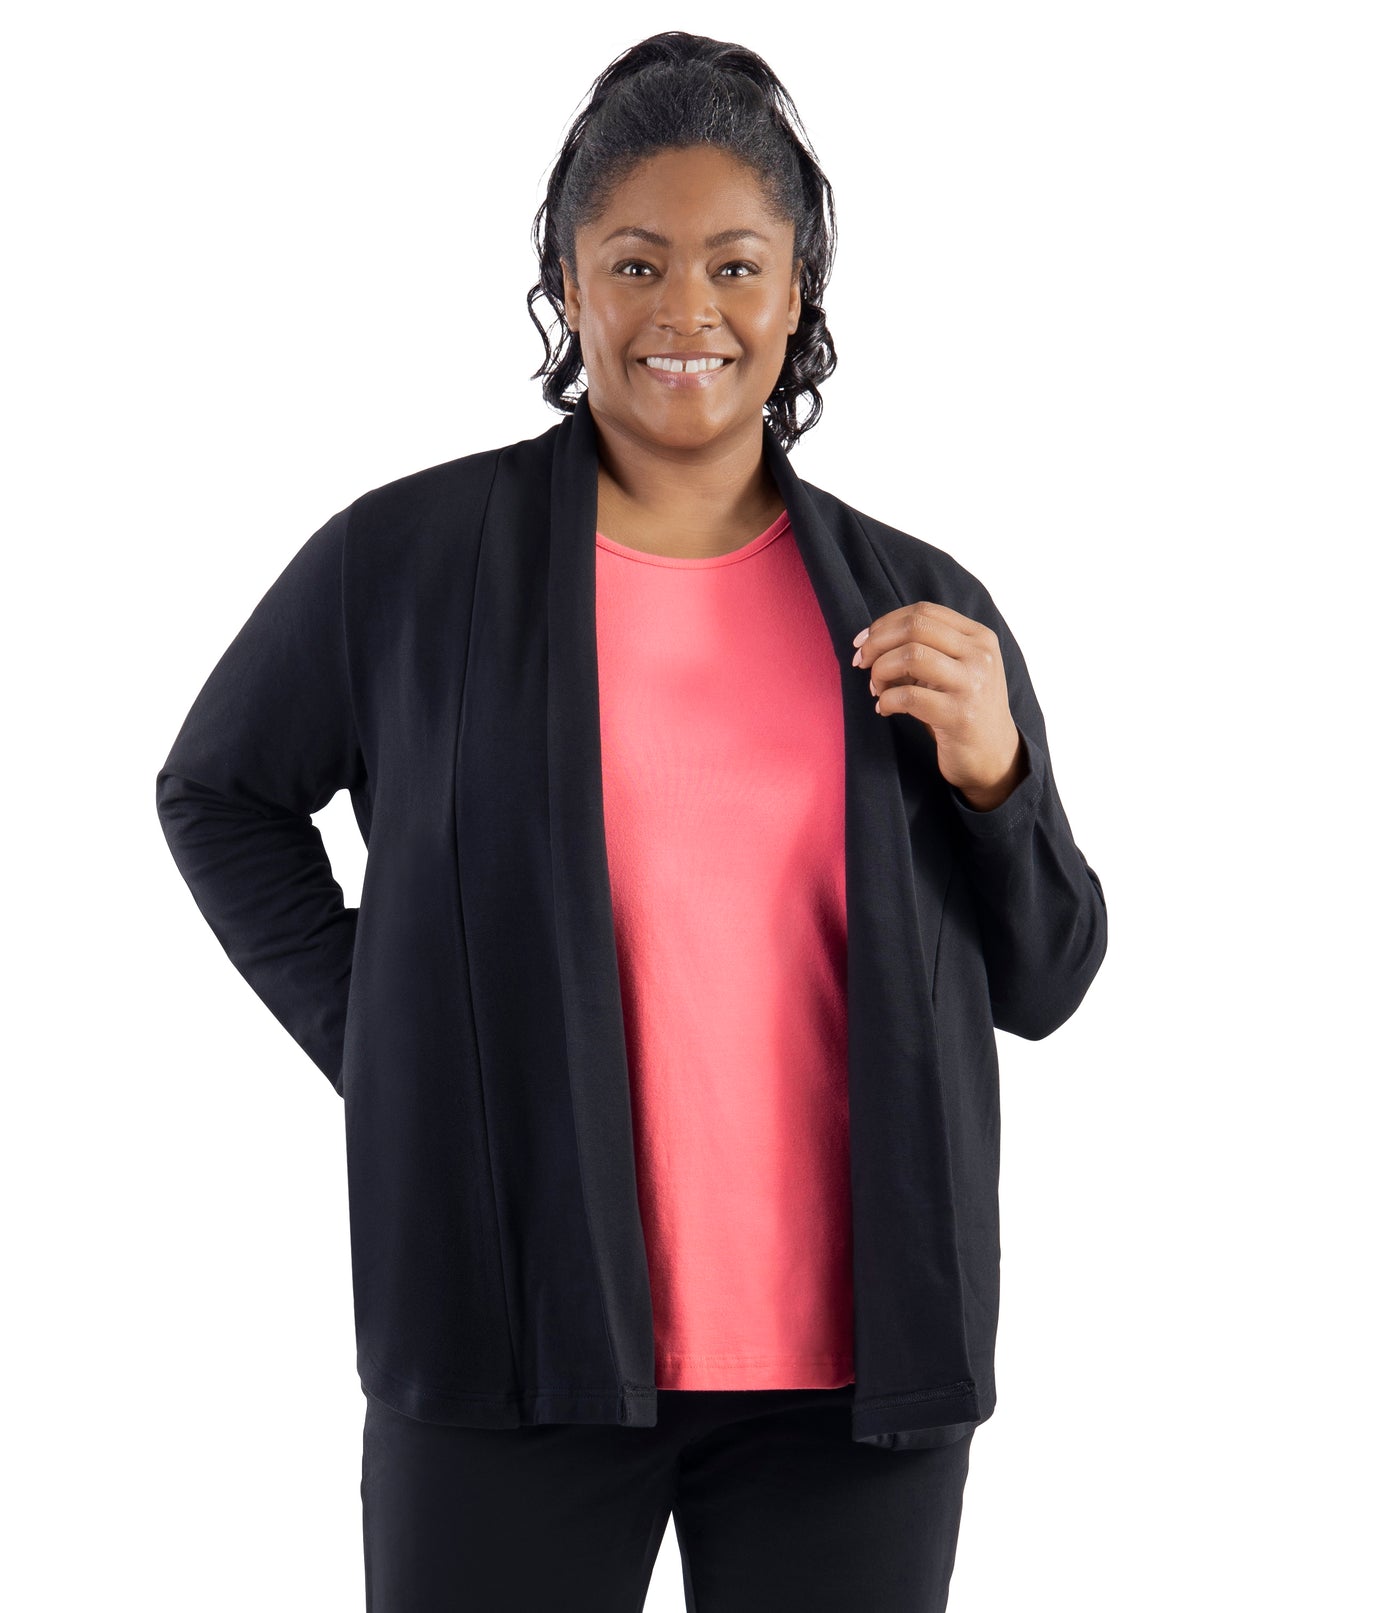 Plus-size model, facing forward, wearing JunoActive's Mavie Cotton Wrap Jacket in color black. Her right hand is in her pocket of jacket and left hand holding top part of jacket.